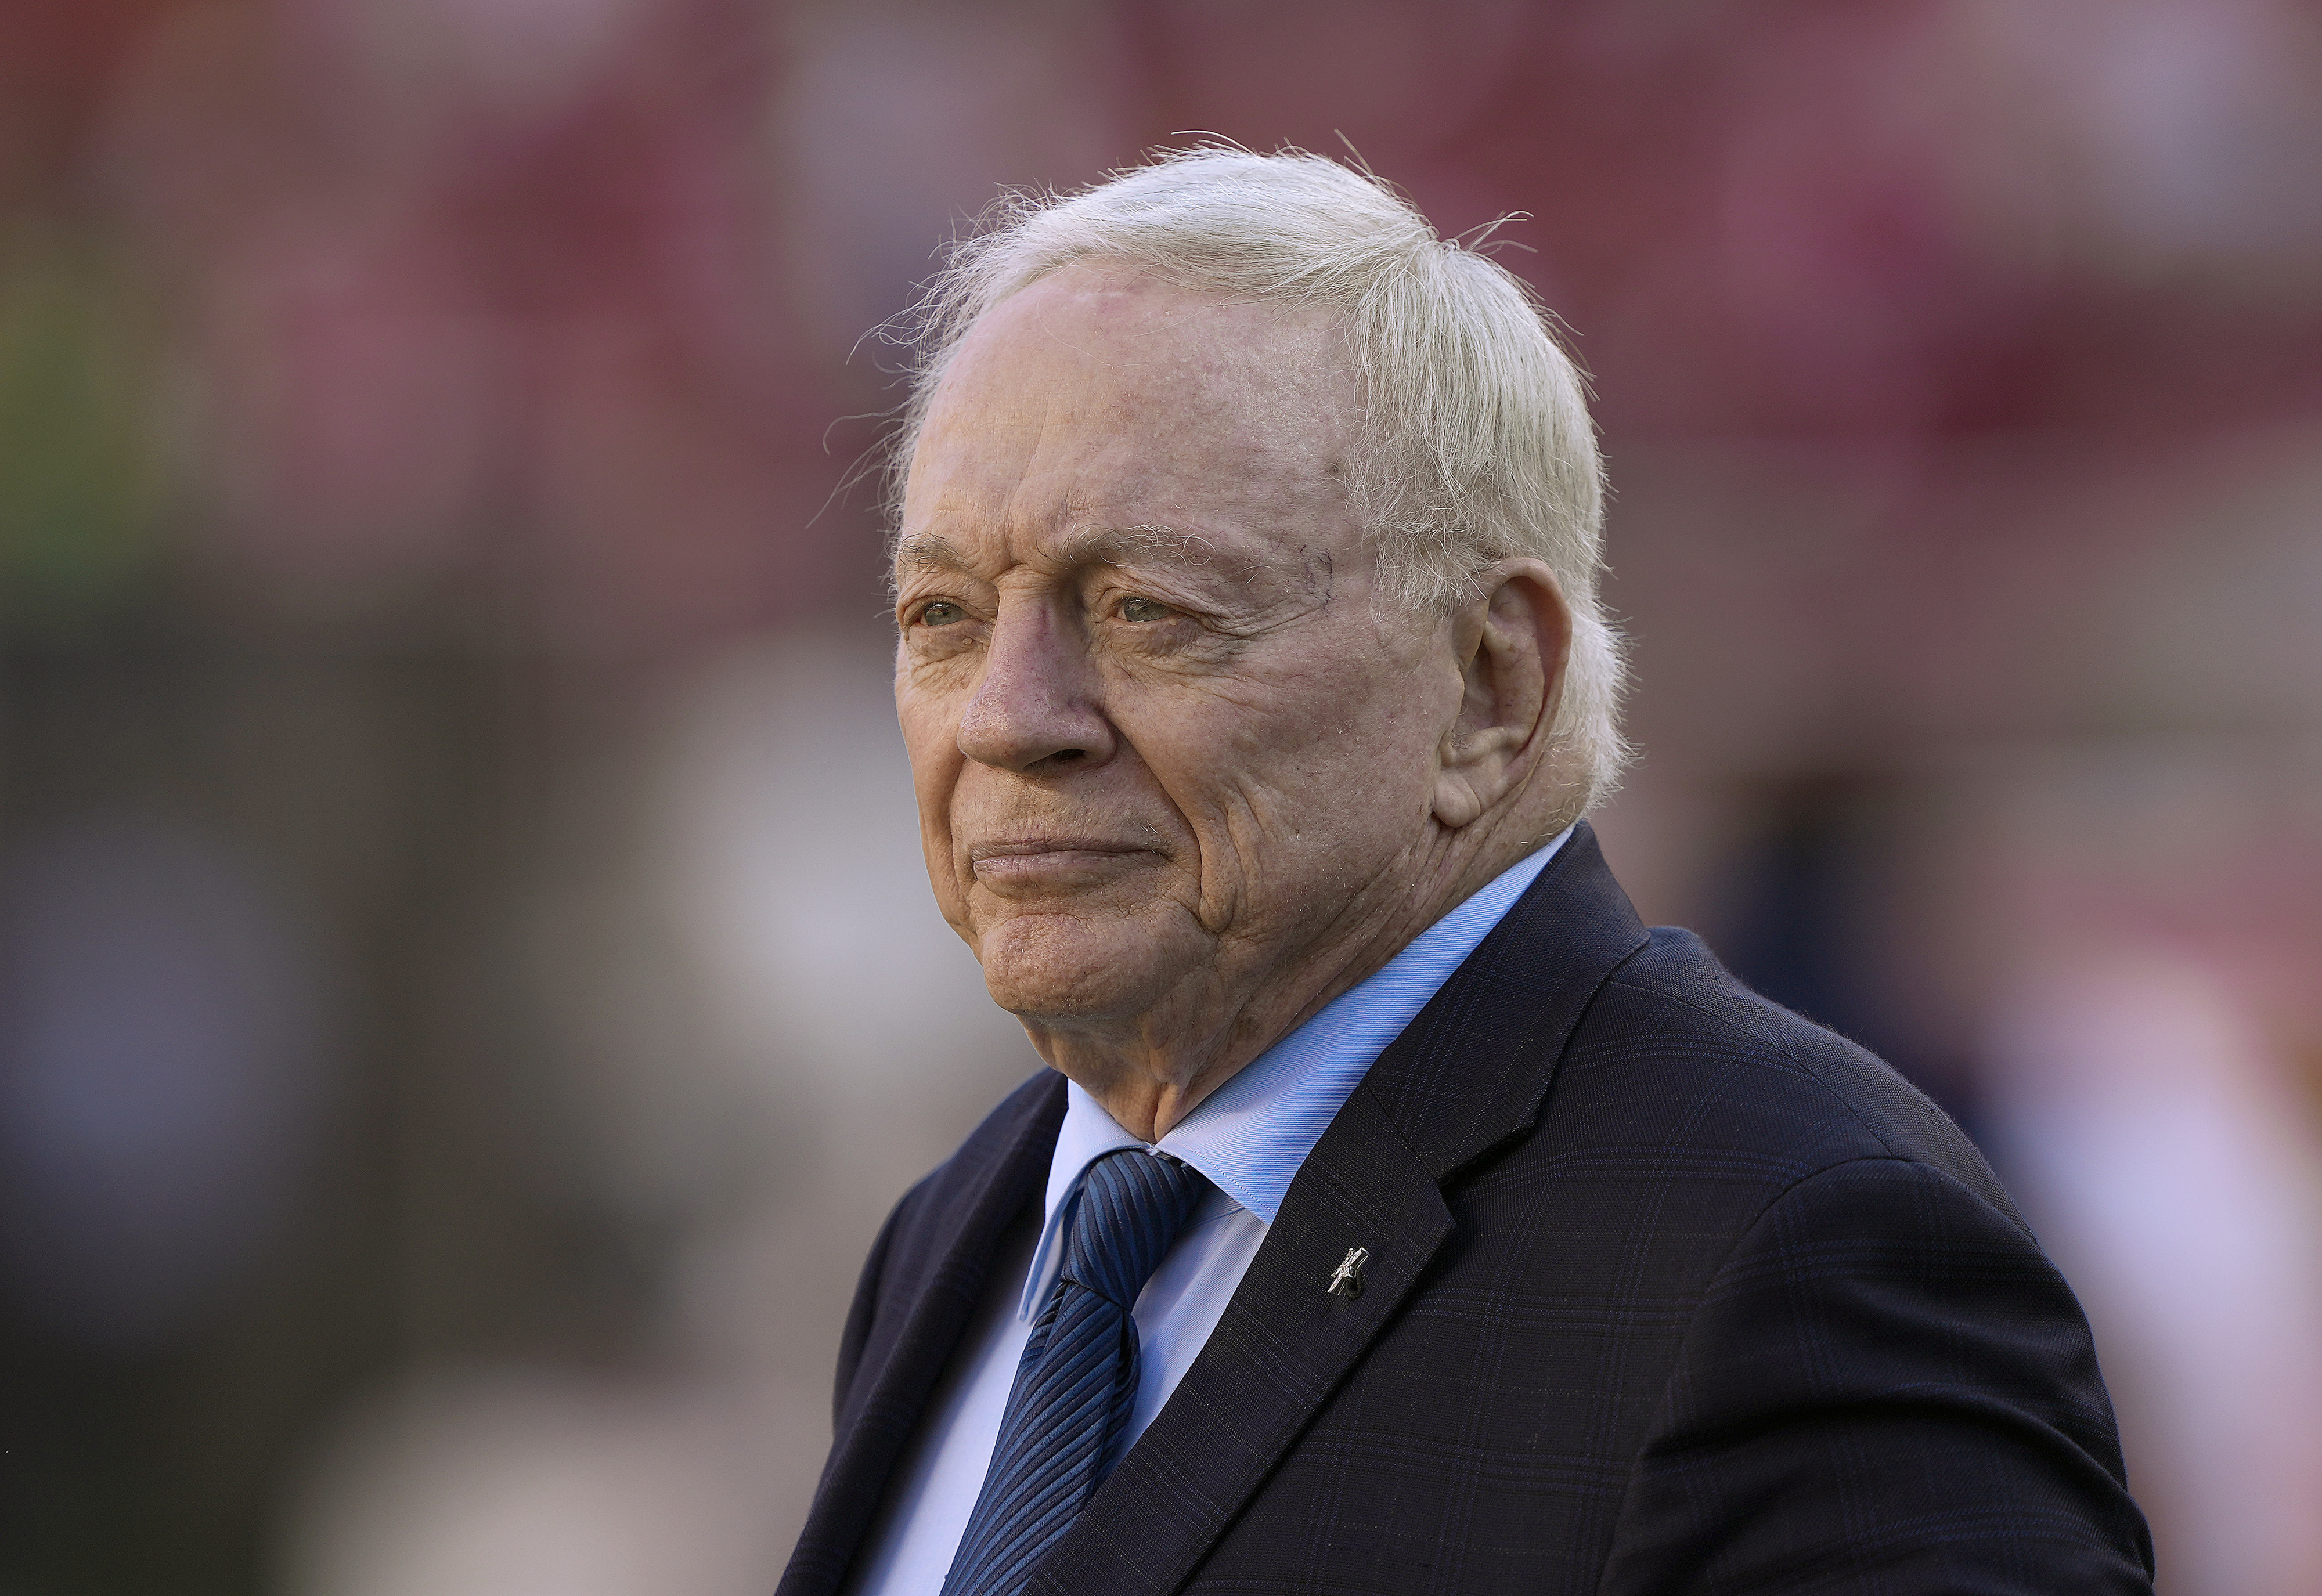 Elderly man with a content expression wearing a suit and tie at a sports event